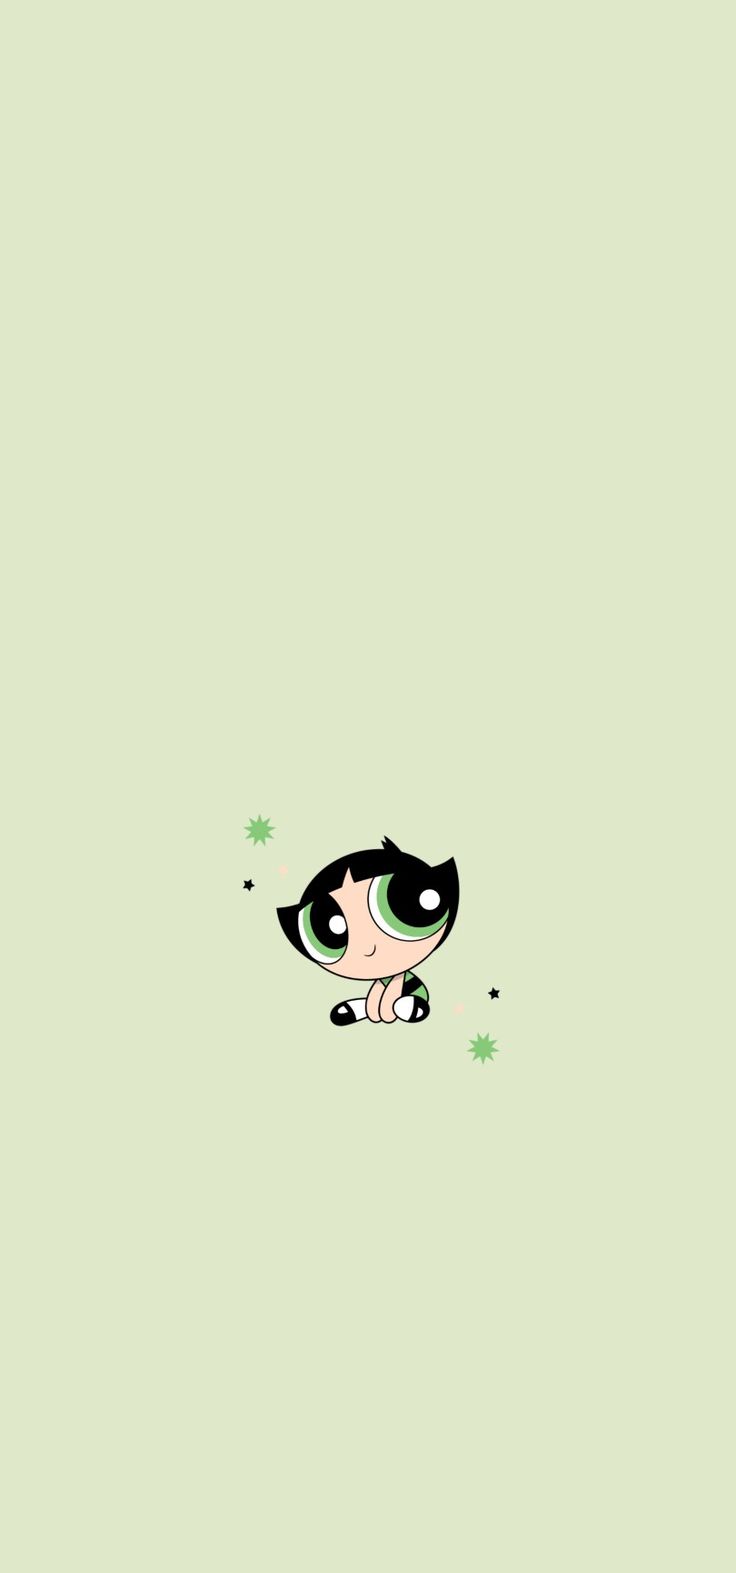 Pastel green, green, light green aesthetic wallpaper for android and ios buttercup wallpaper aesth. Papeis de parede